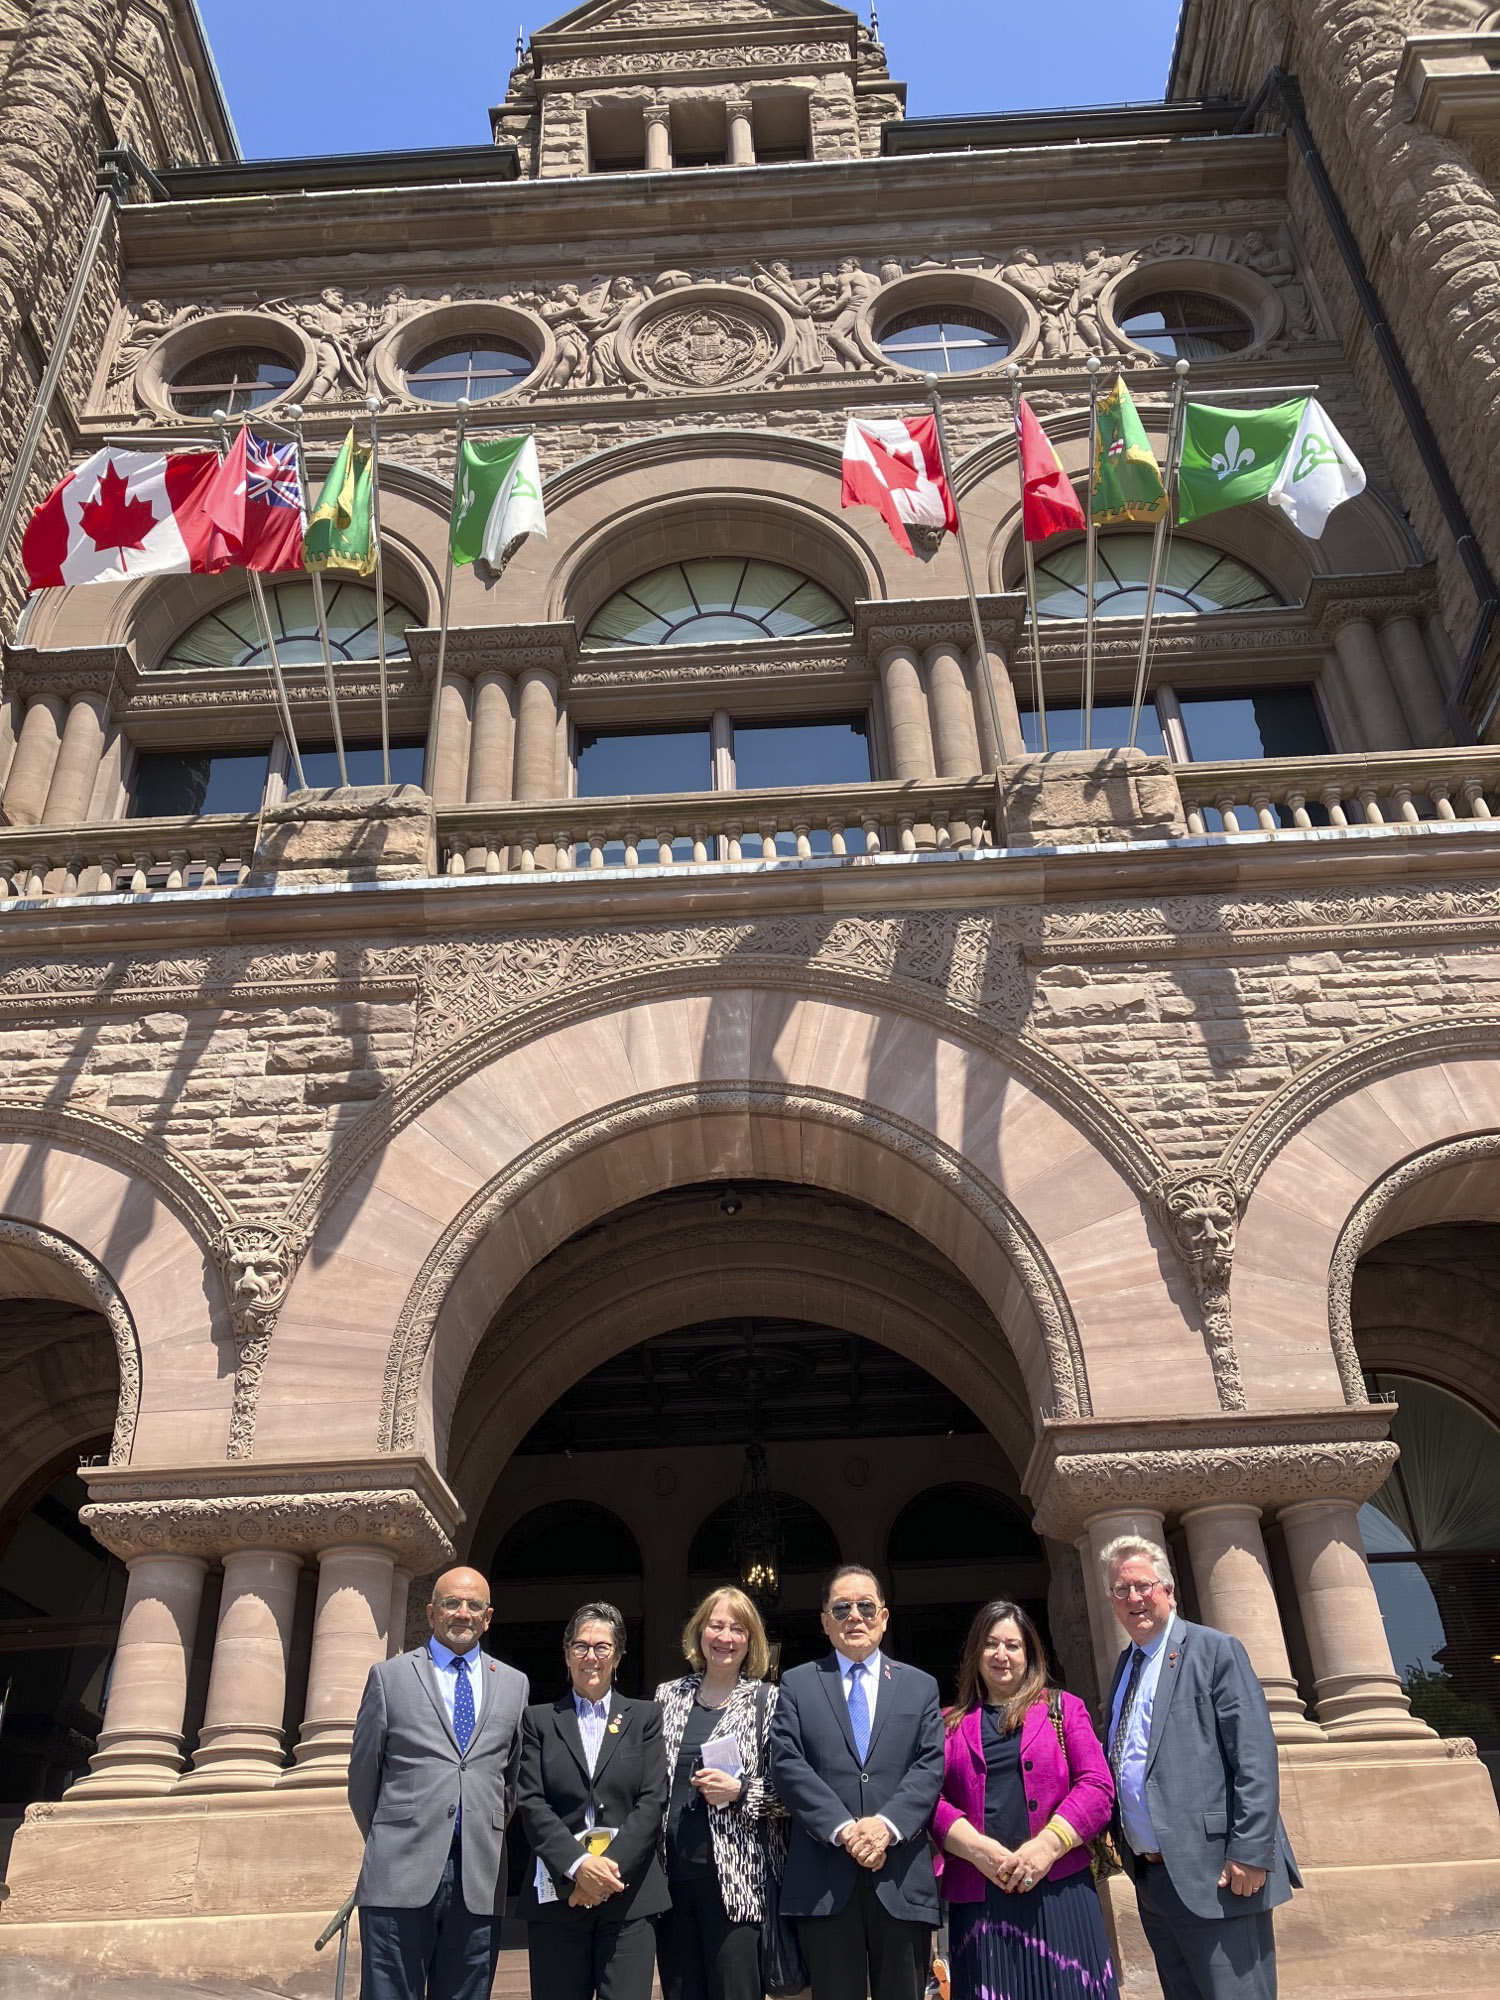 Monday, May 29, 2023 – From left, senators Andrew Cardozo, Kim Pate, Donna Dasko, Victor Oh, Salma Ataullahjan, and Rob Black, visit the Ontario Legislature. The day trip, organized by Senator Black and Ontario Legislature Speaker Ted Arnott, included a tour of the legislative building, an acknowledgement in the chamber by Speaker Arnott, a luncheon reception with members of provincial Parliament (MPP) and a roundtable discussion with MPPs from all political parties.